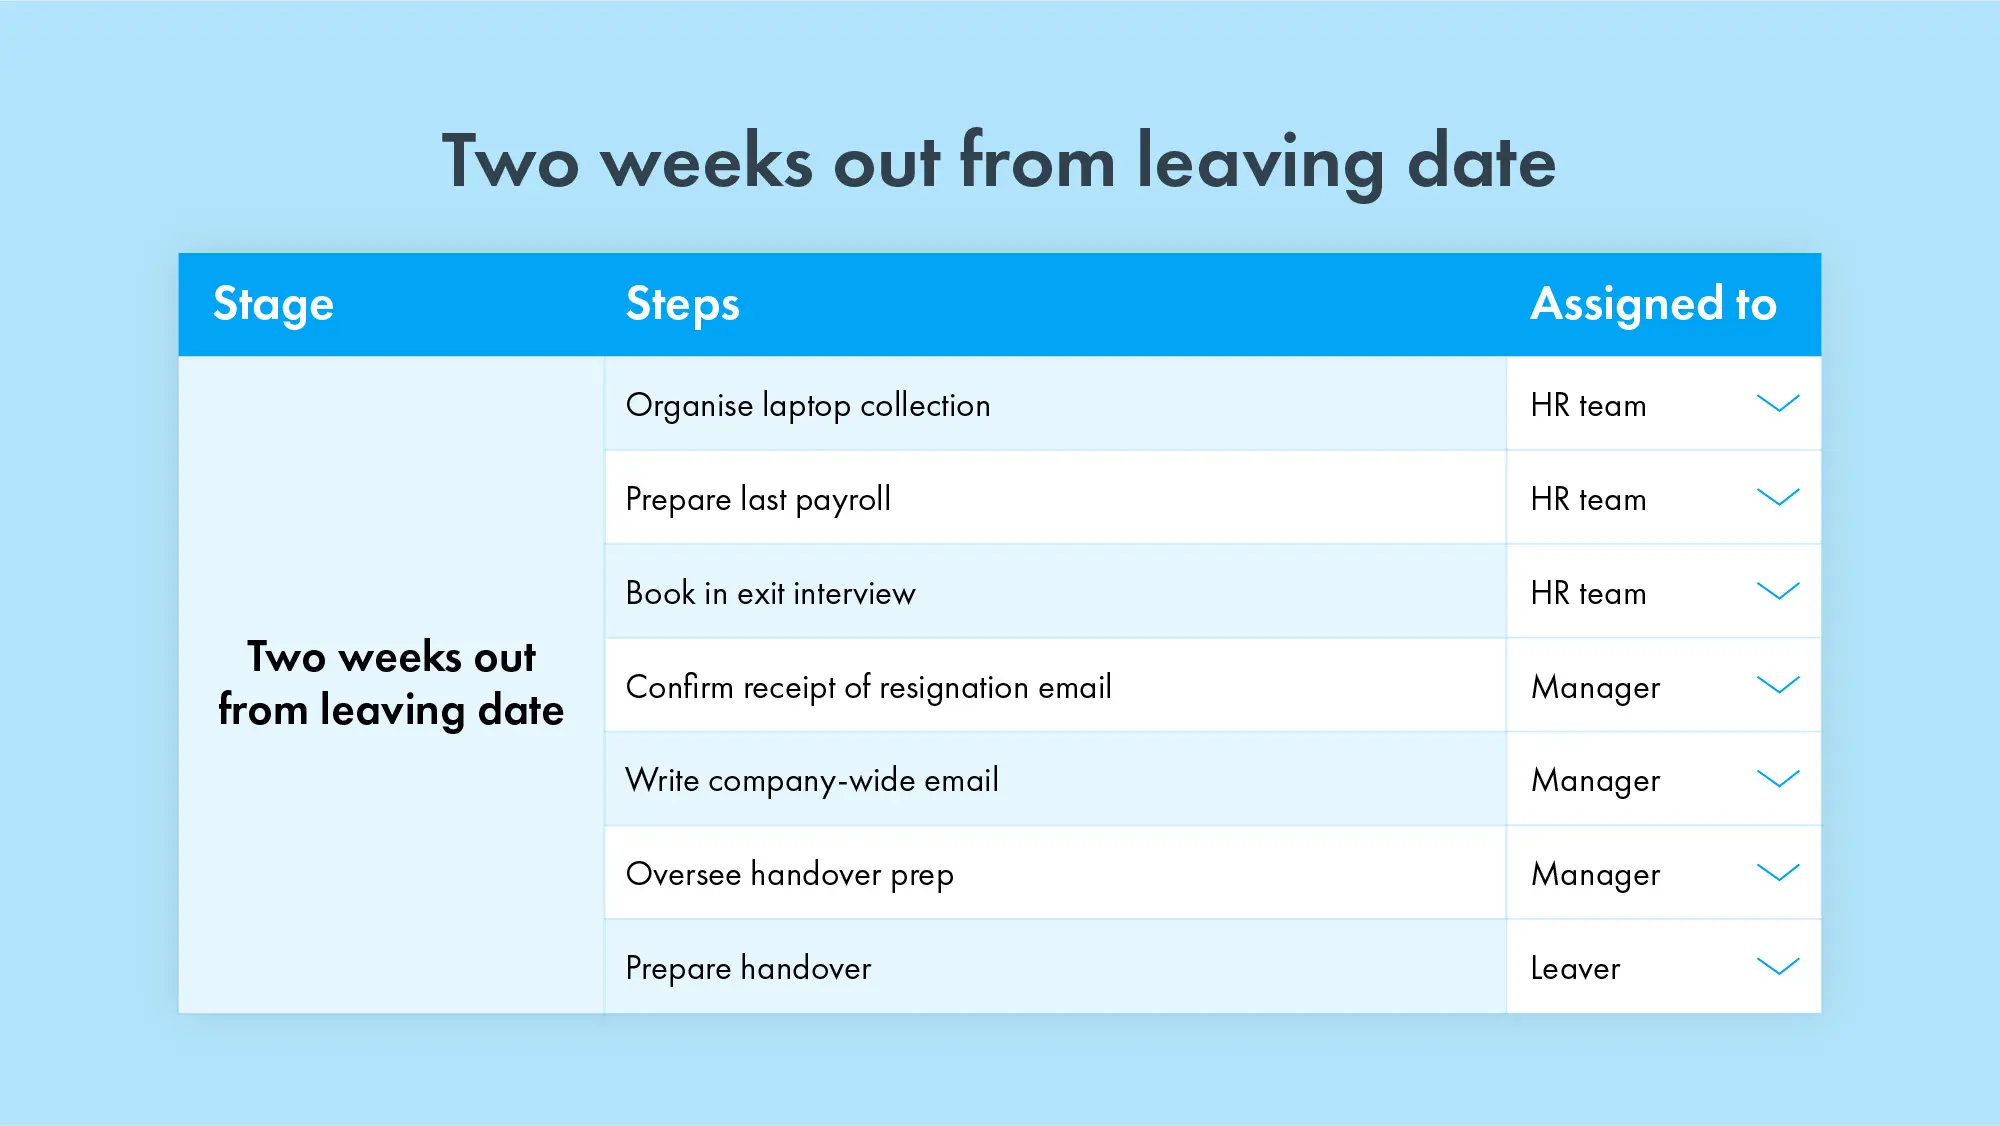 Summary of offboarding checklist: one-week out from leaving date